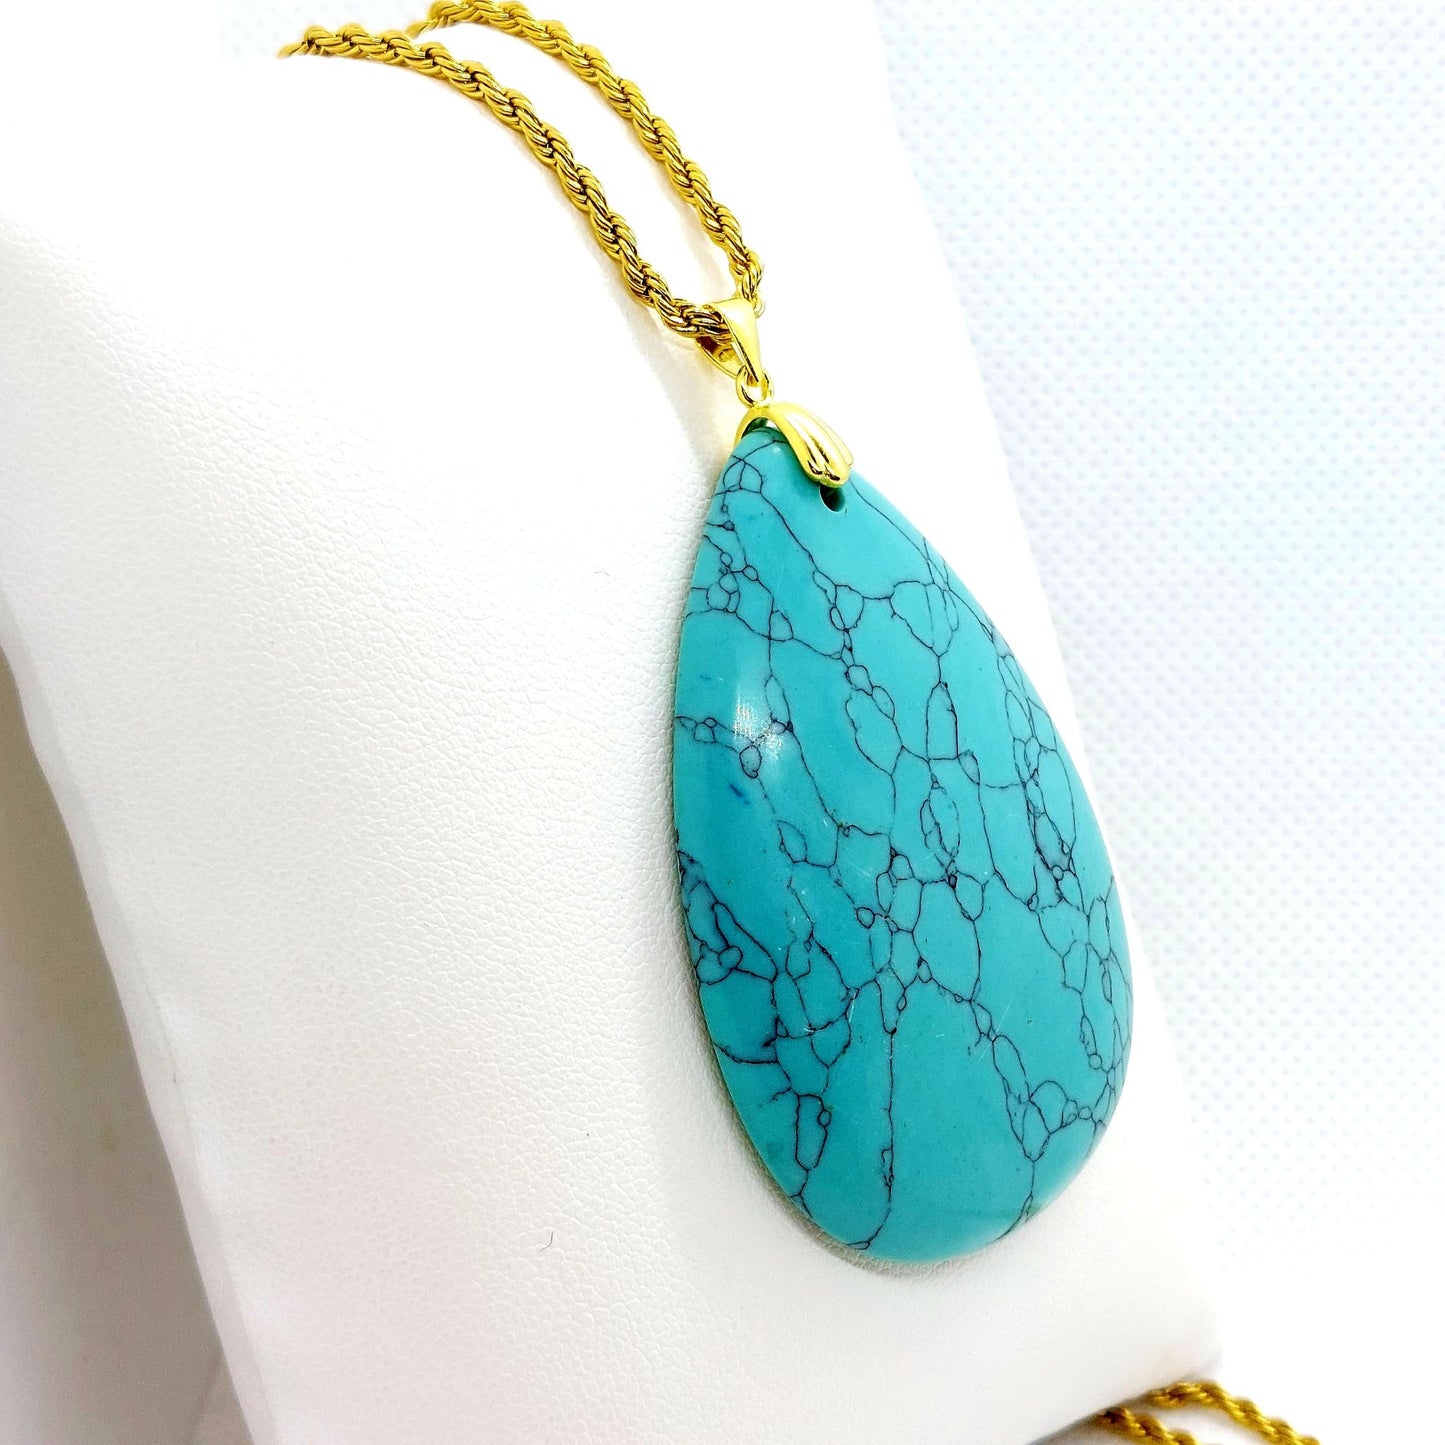 Natural Turquoise Teardrop Pendant - Stainless Steel Gold Plated Necklace Chain